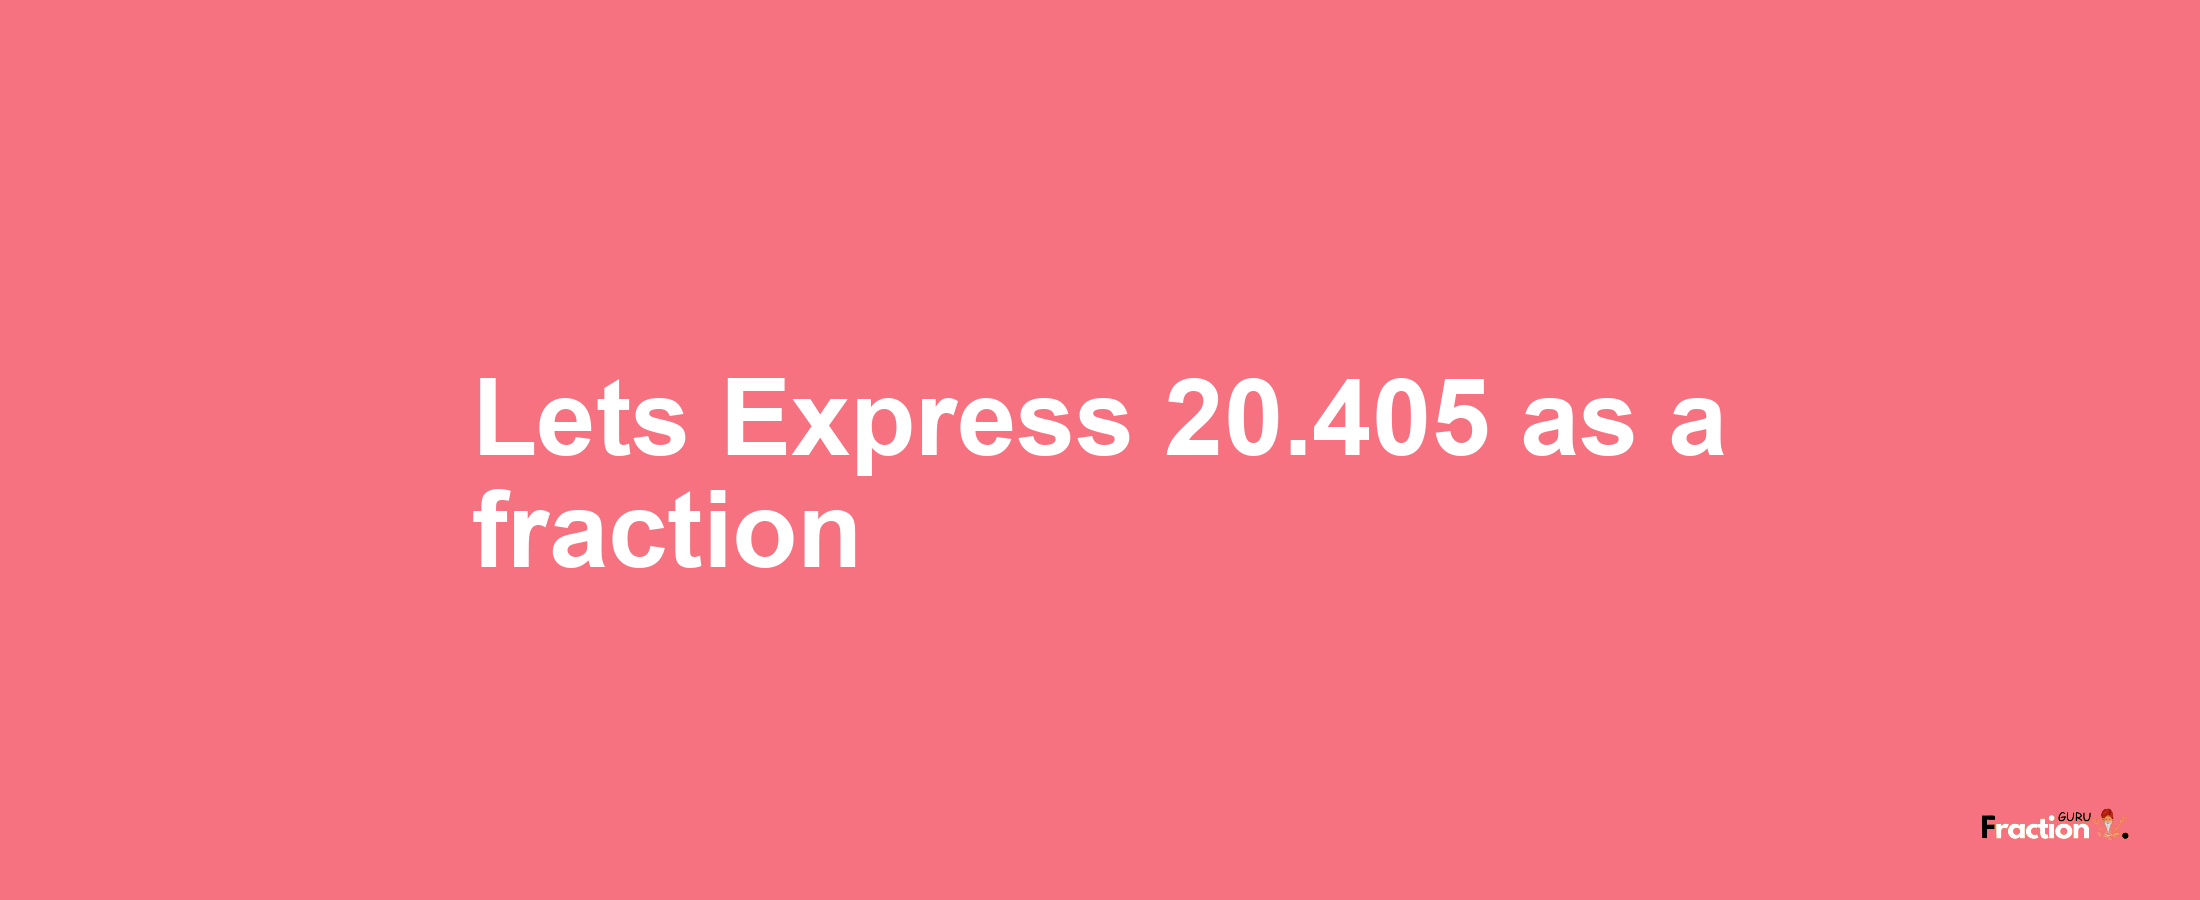 Lets Express 20.405 as afraction